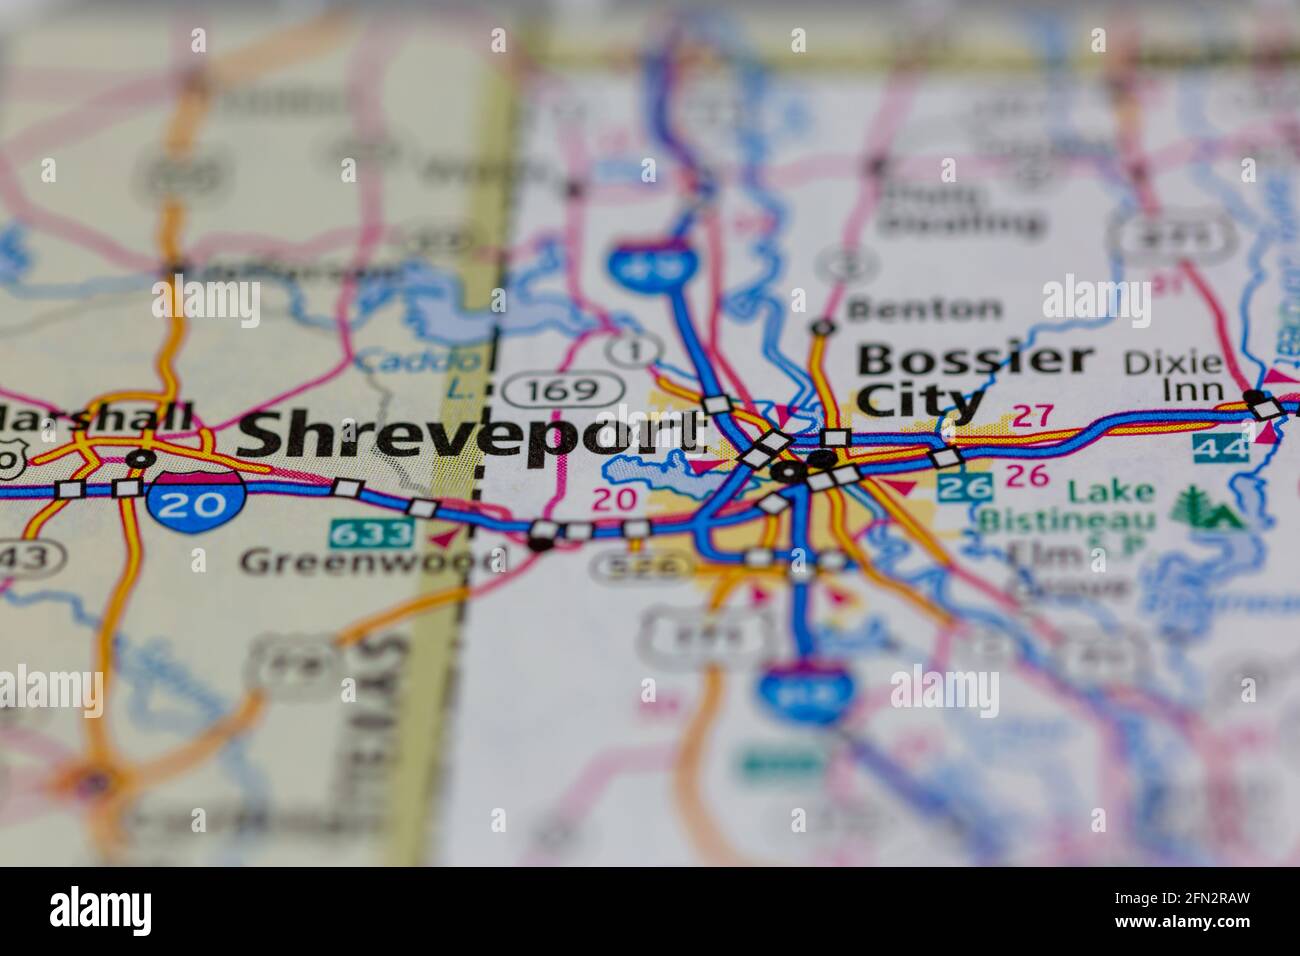 Shreveport Louisiana USA Shown on a Geography map or road map Stock Photo